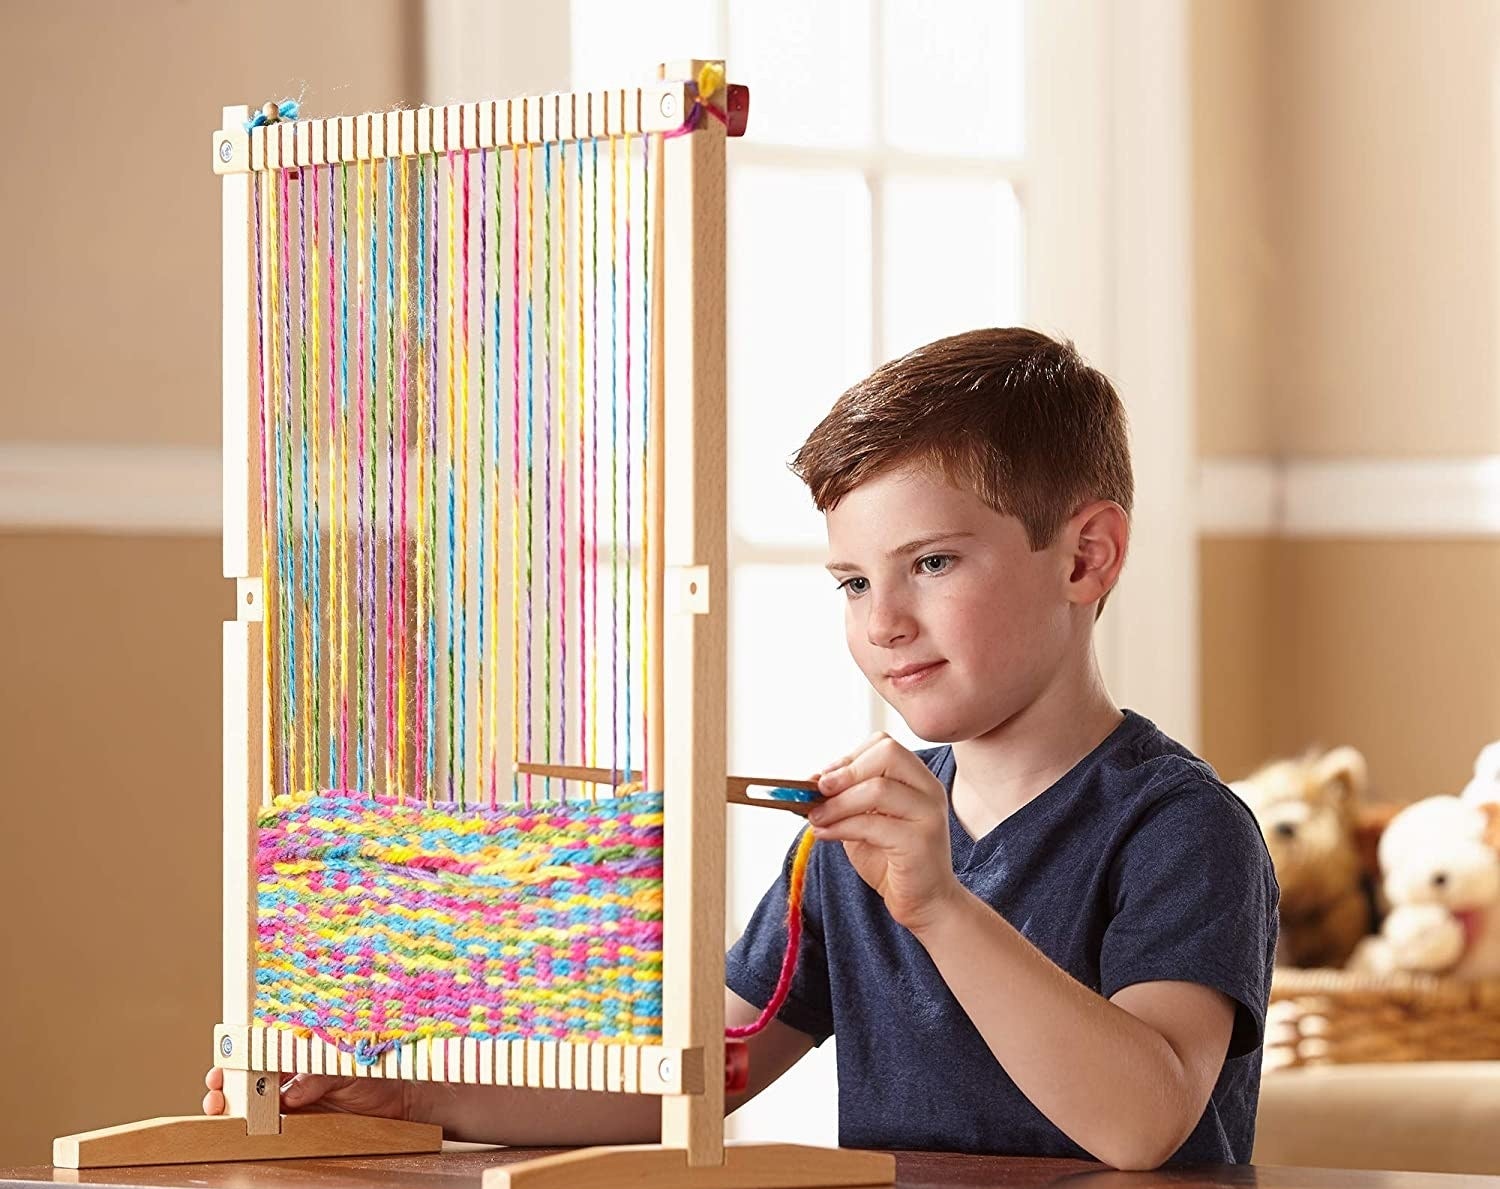 Child model playing with loom and colorful yarn